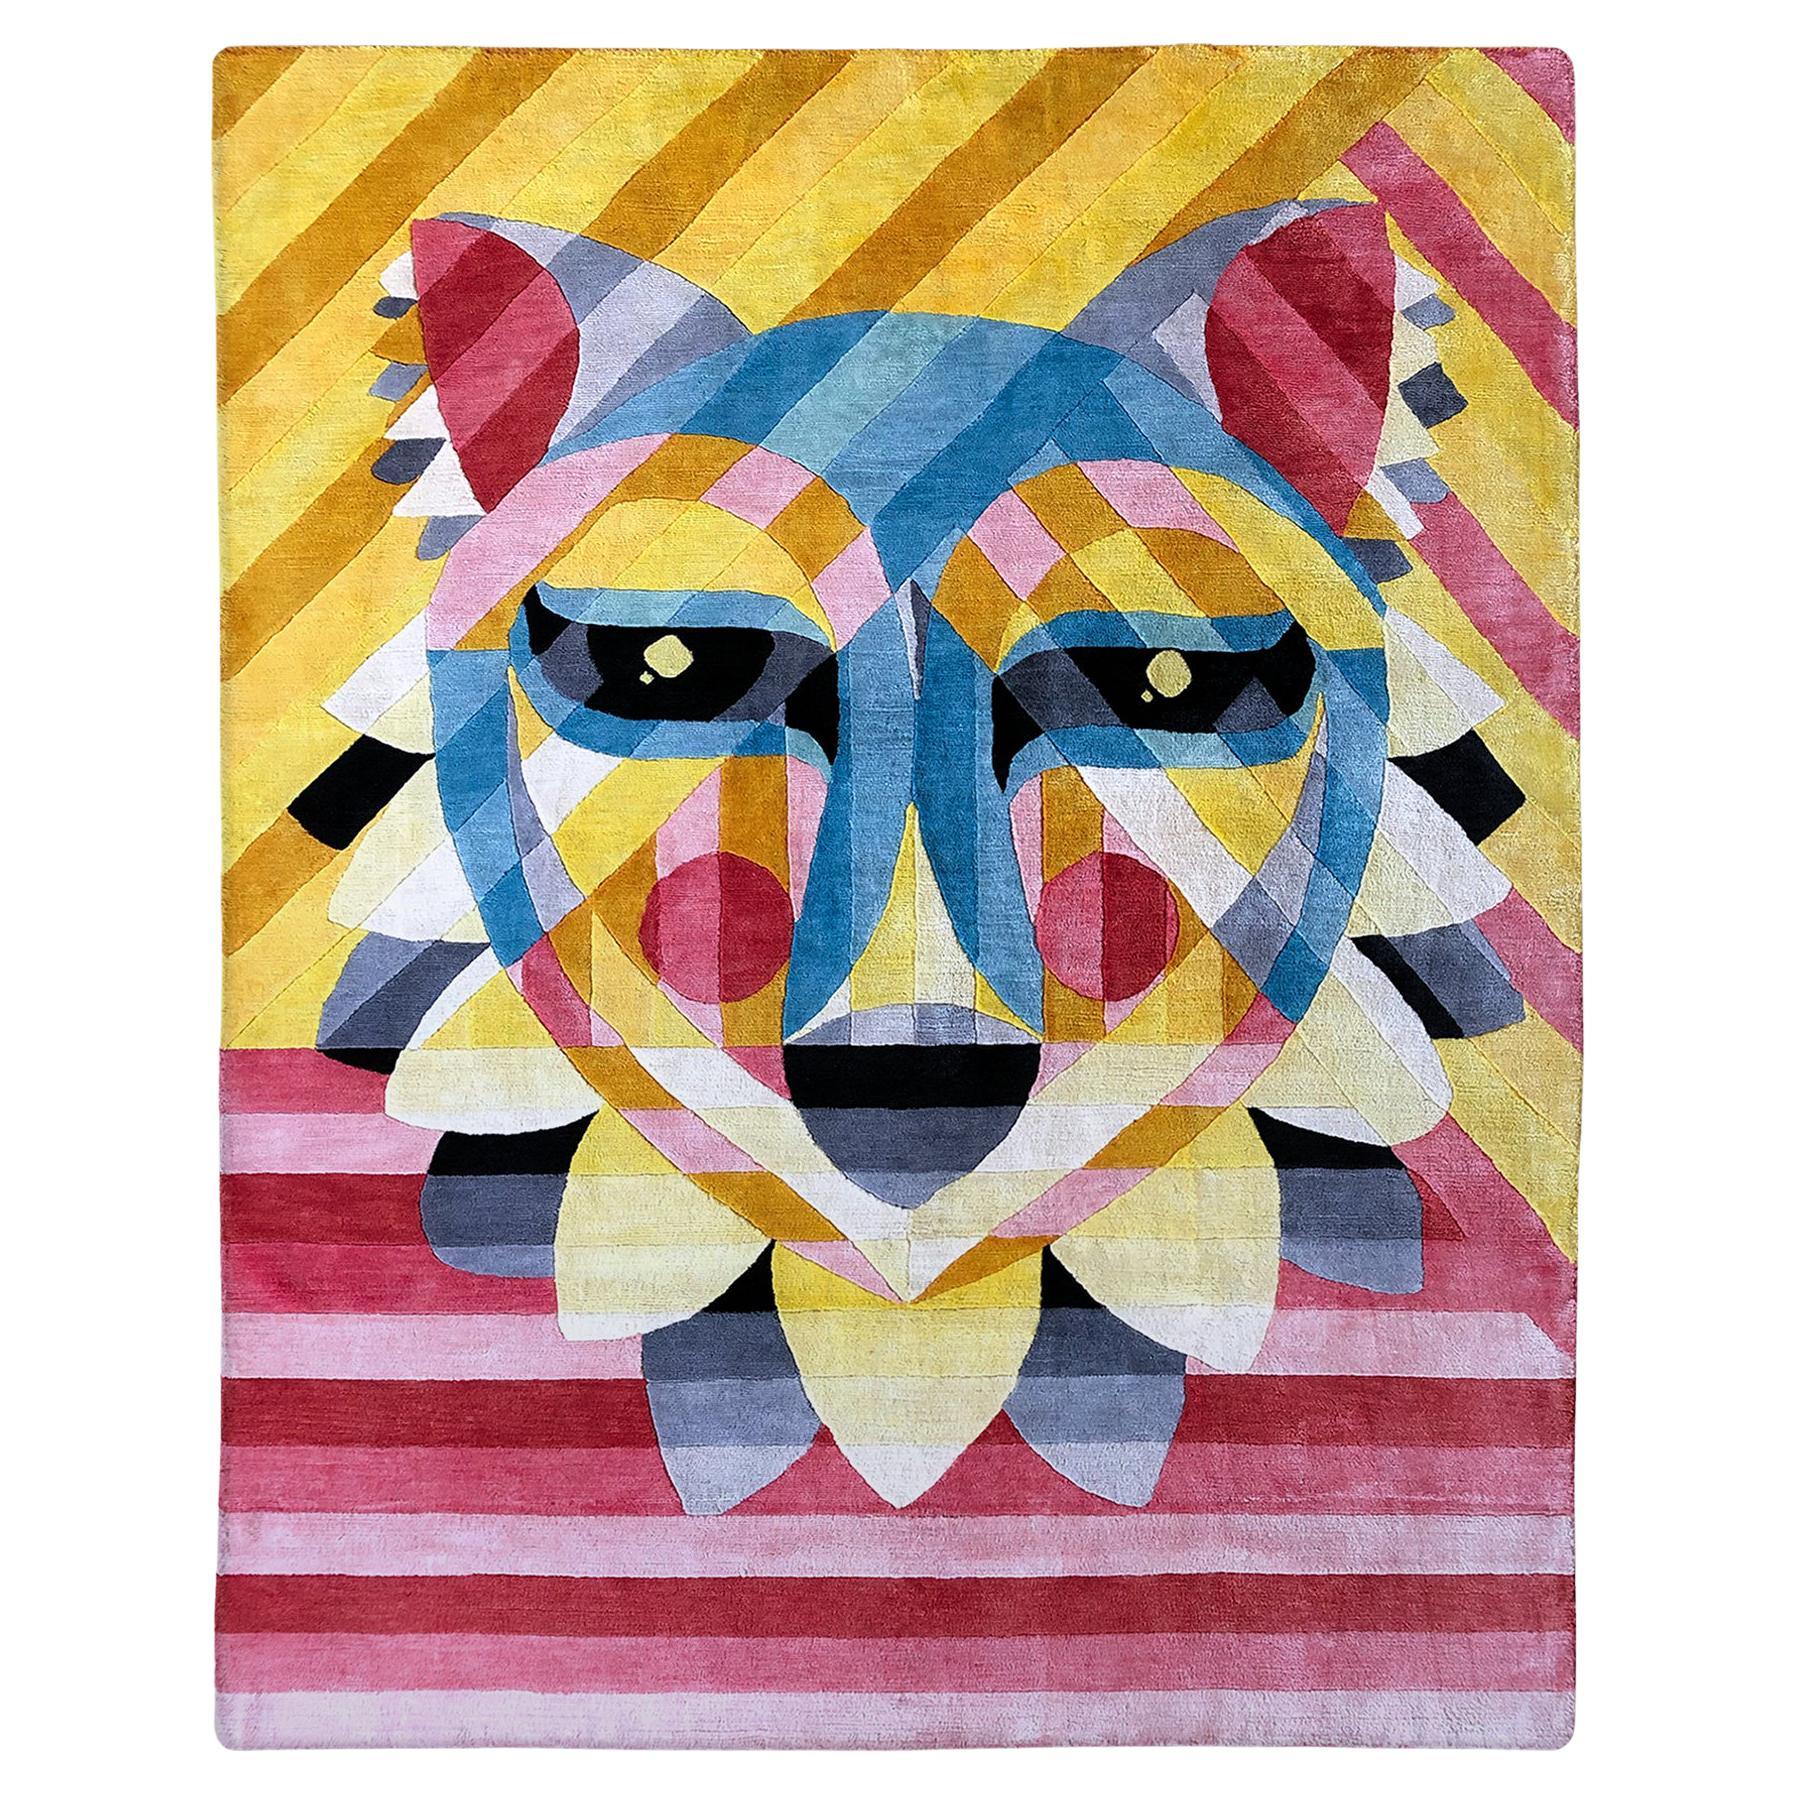 Desert Fox Rug by Ruben Sanchez, Hand Knotted, 100% New Zealand Wool 200x250cm For Sale